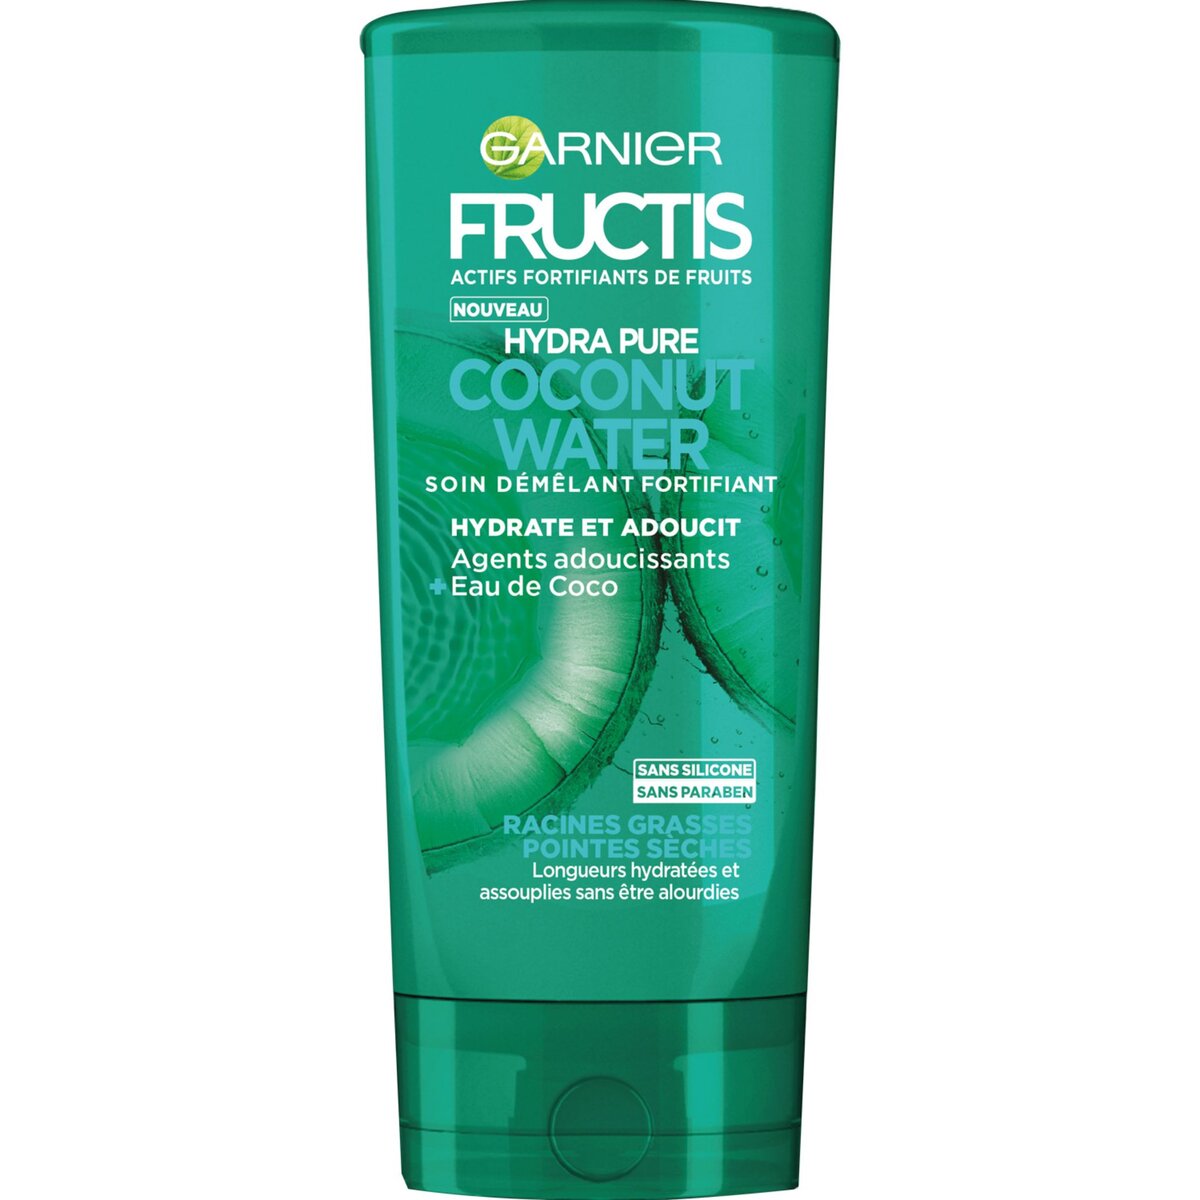 FRUCTIS Fructis après shampooing hydra pure coconut water 200ml